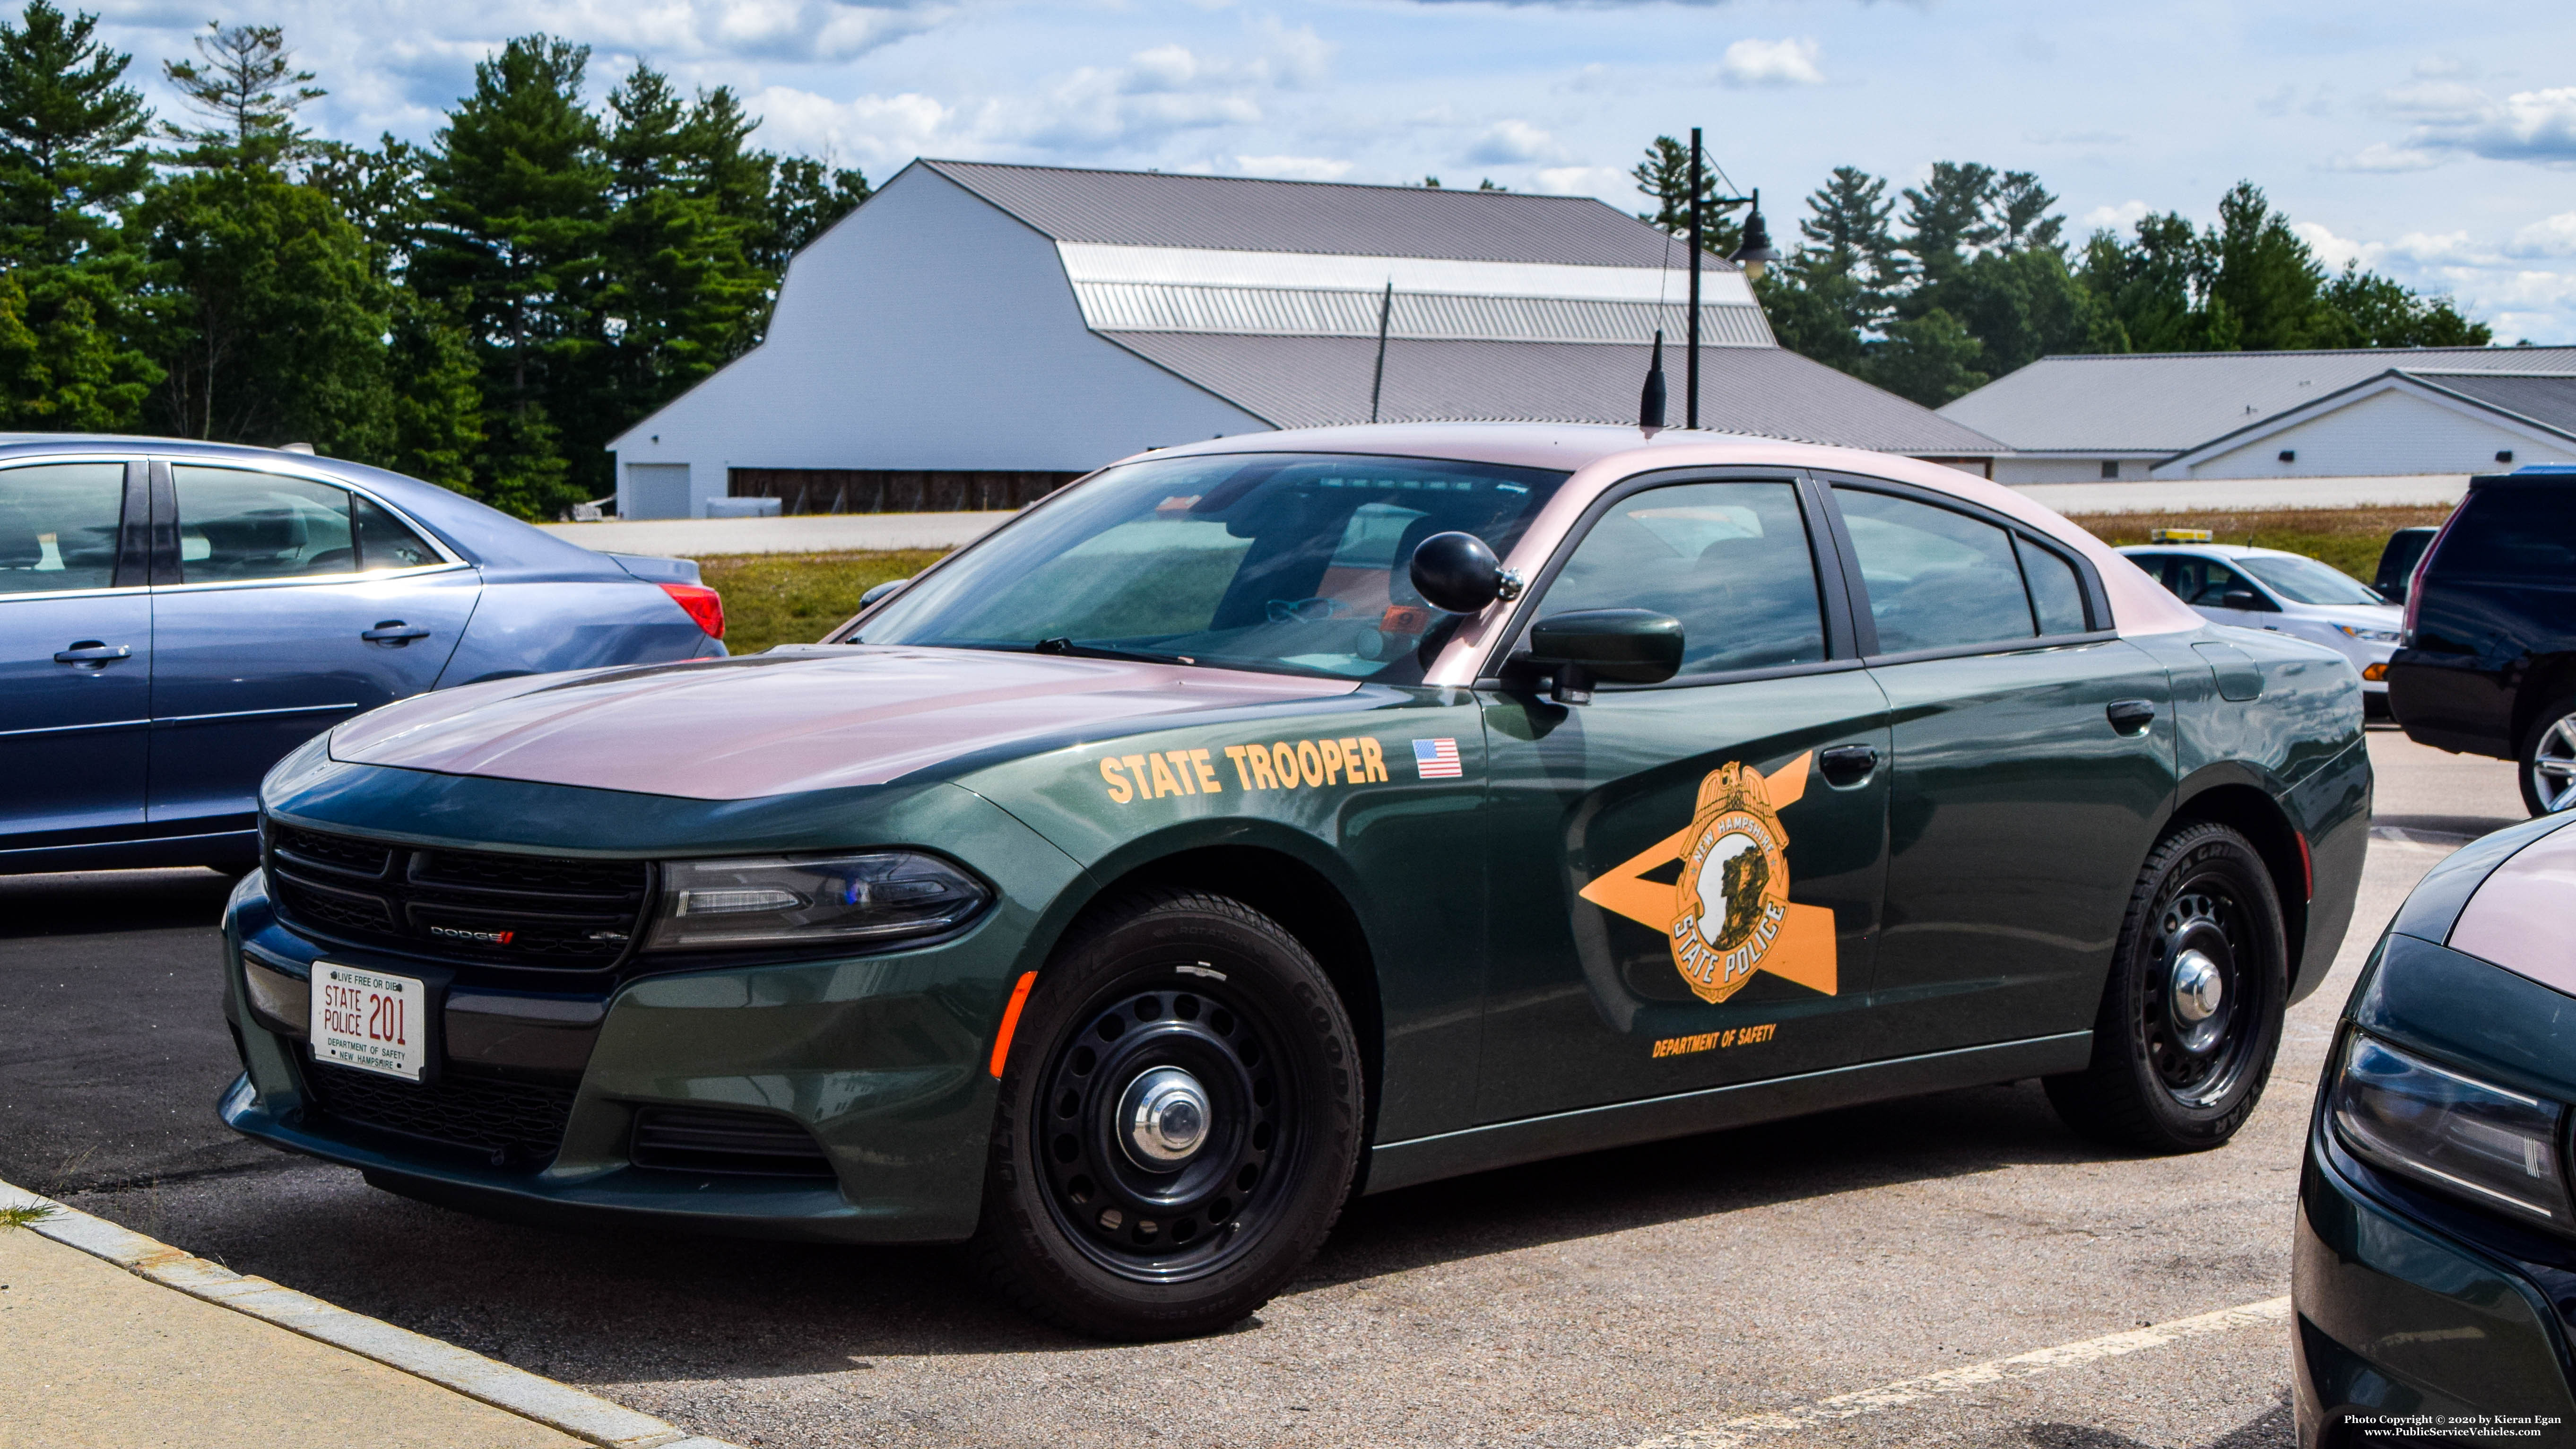 A photo  of New Hampshire State Police
            Cruiser 201, a 2015-2019 Dodge Charger             taken by Kieran Egan